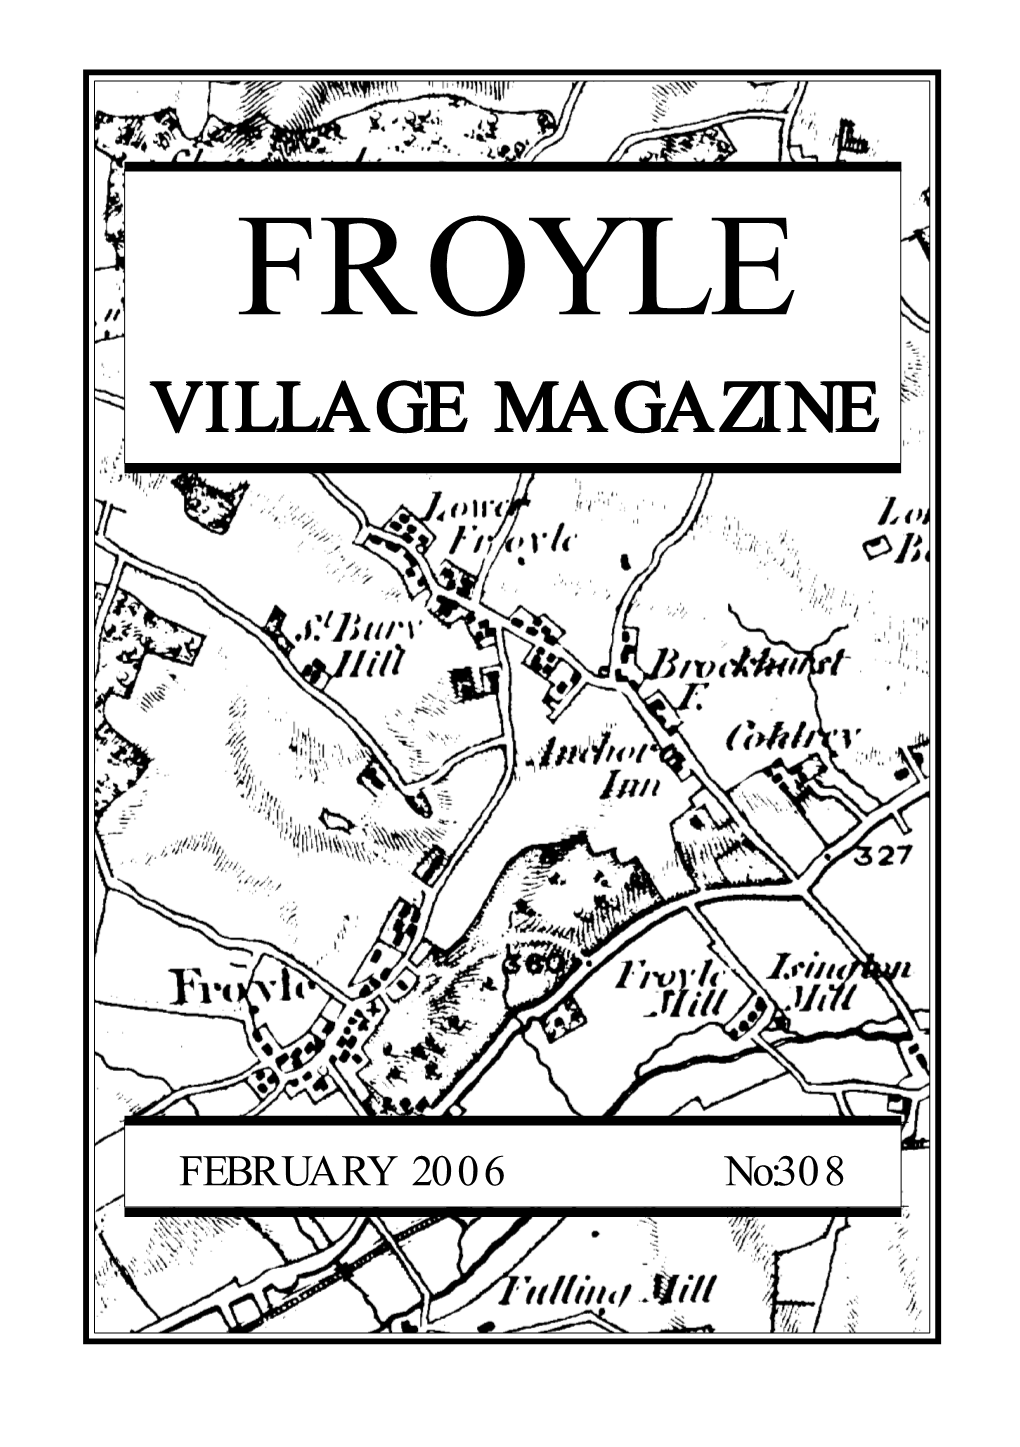 Froyle Village Hall Saturday, April 1St - Doors Open 2.00Pm More Details in the March Magazine, but Start Turning out Your Unwanted Clothes, Bric-A-Brac Etc